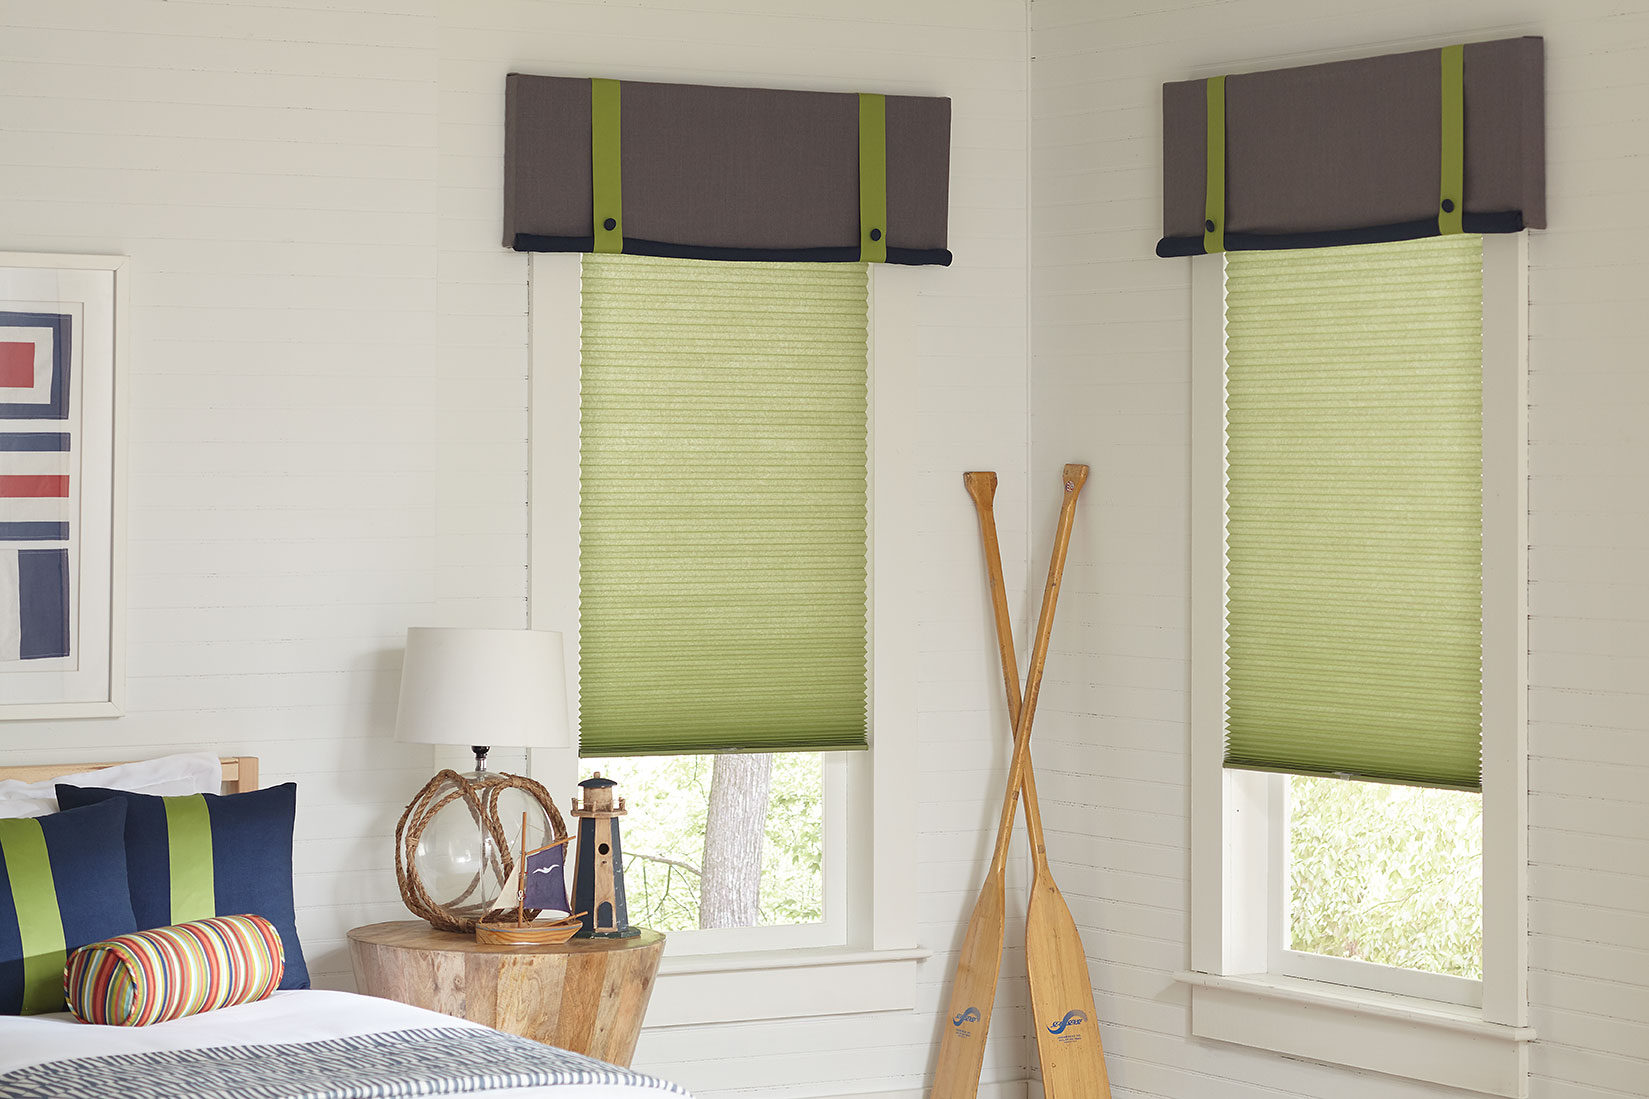 Light, grassy green cellular shades hang in the two corner windows of a child's bedroom featuring nautical accessories, custom matching valances in gray and pillows in navy with green accents.